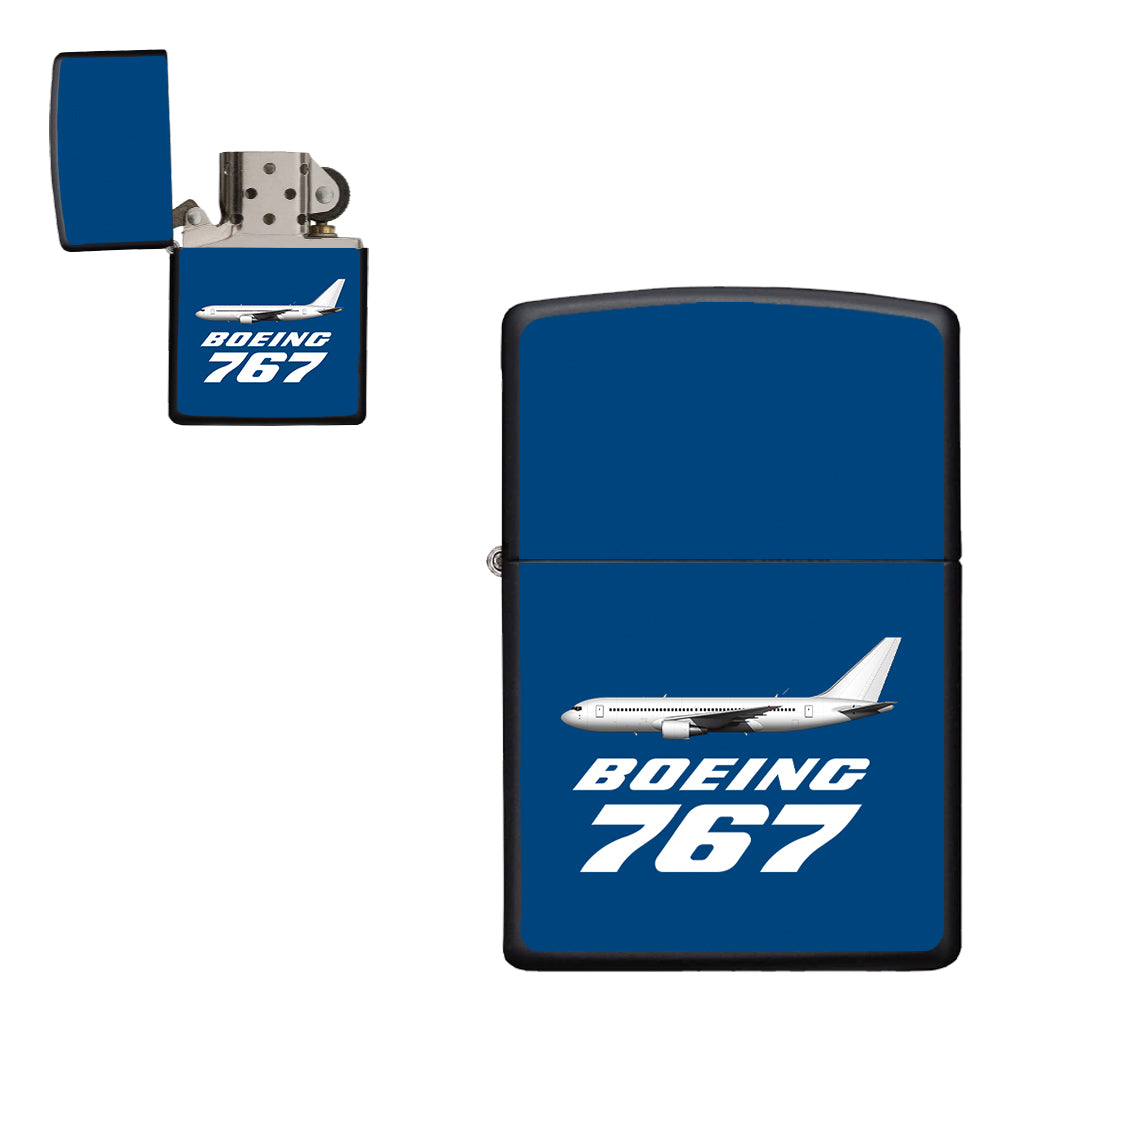 The Boeing 767 Designed Metal Lighters